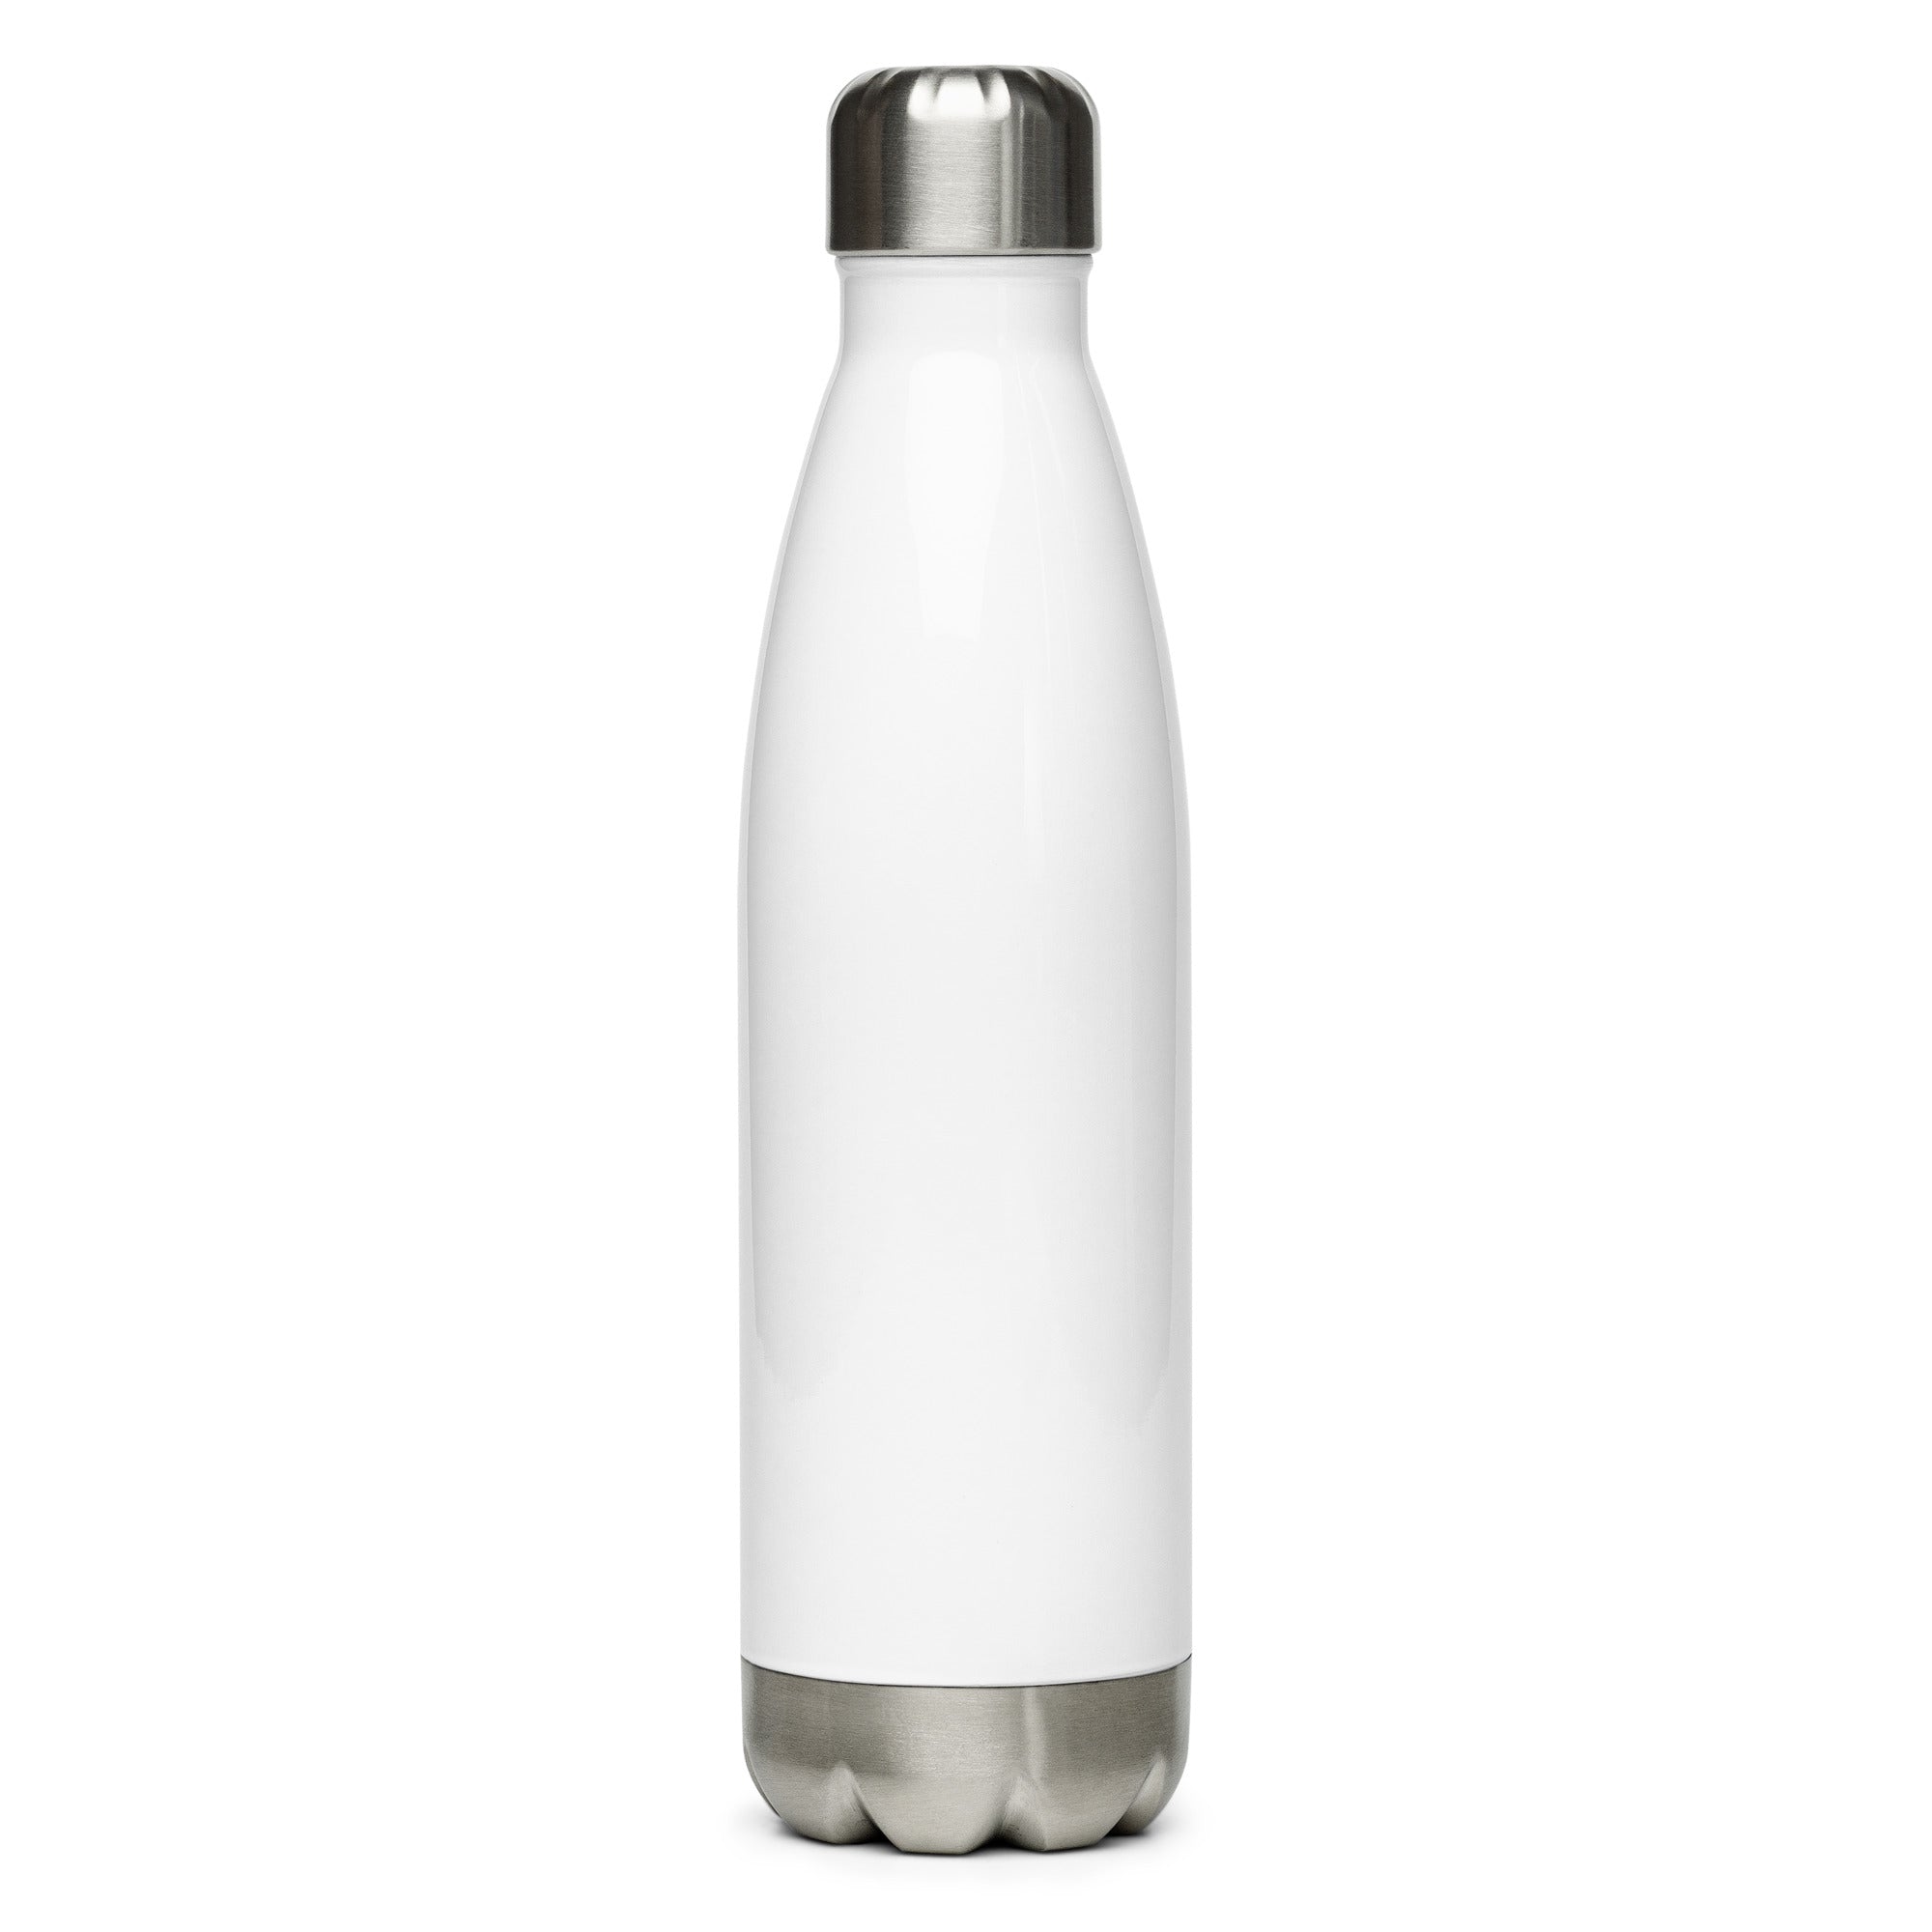 CLCS Stainless Steel Water Bottle